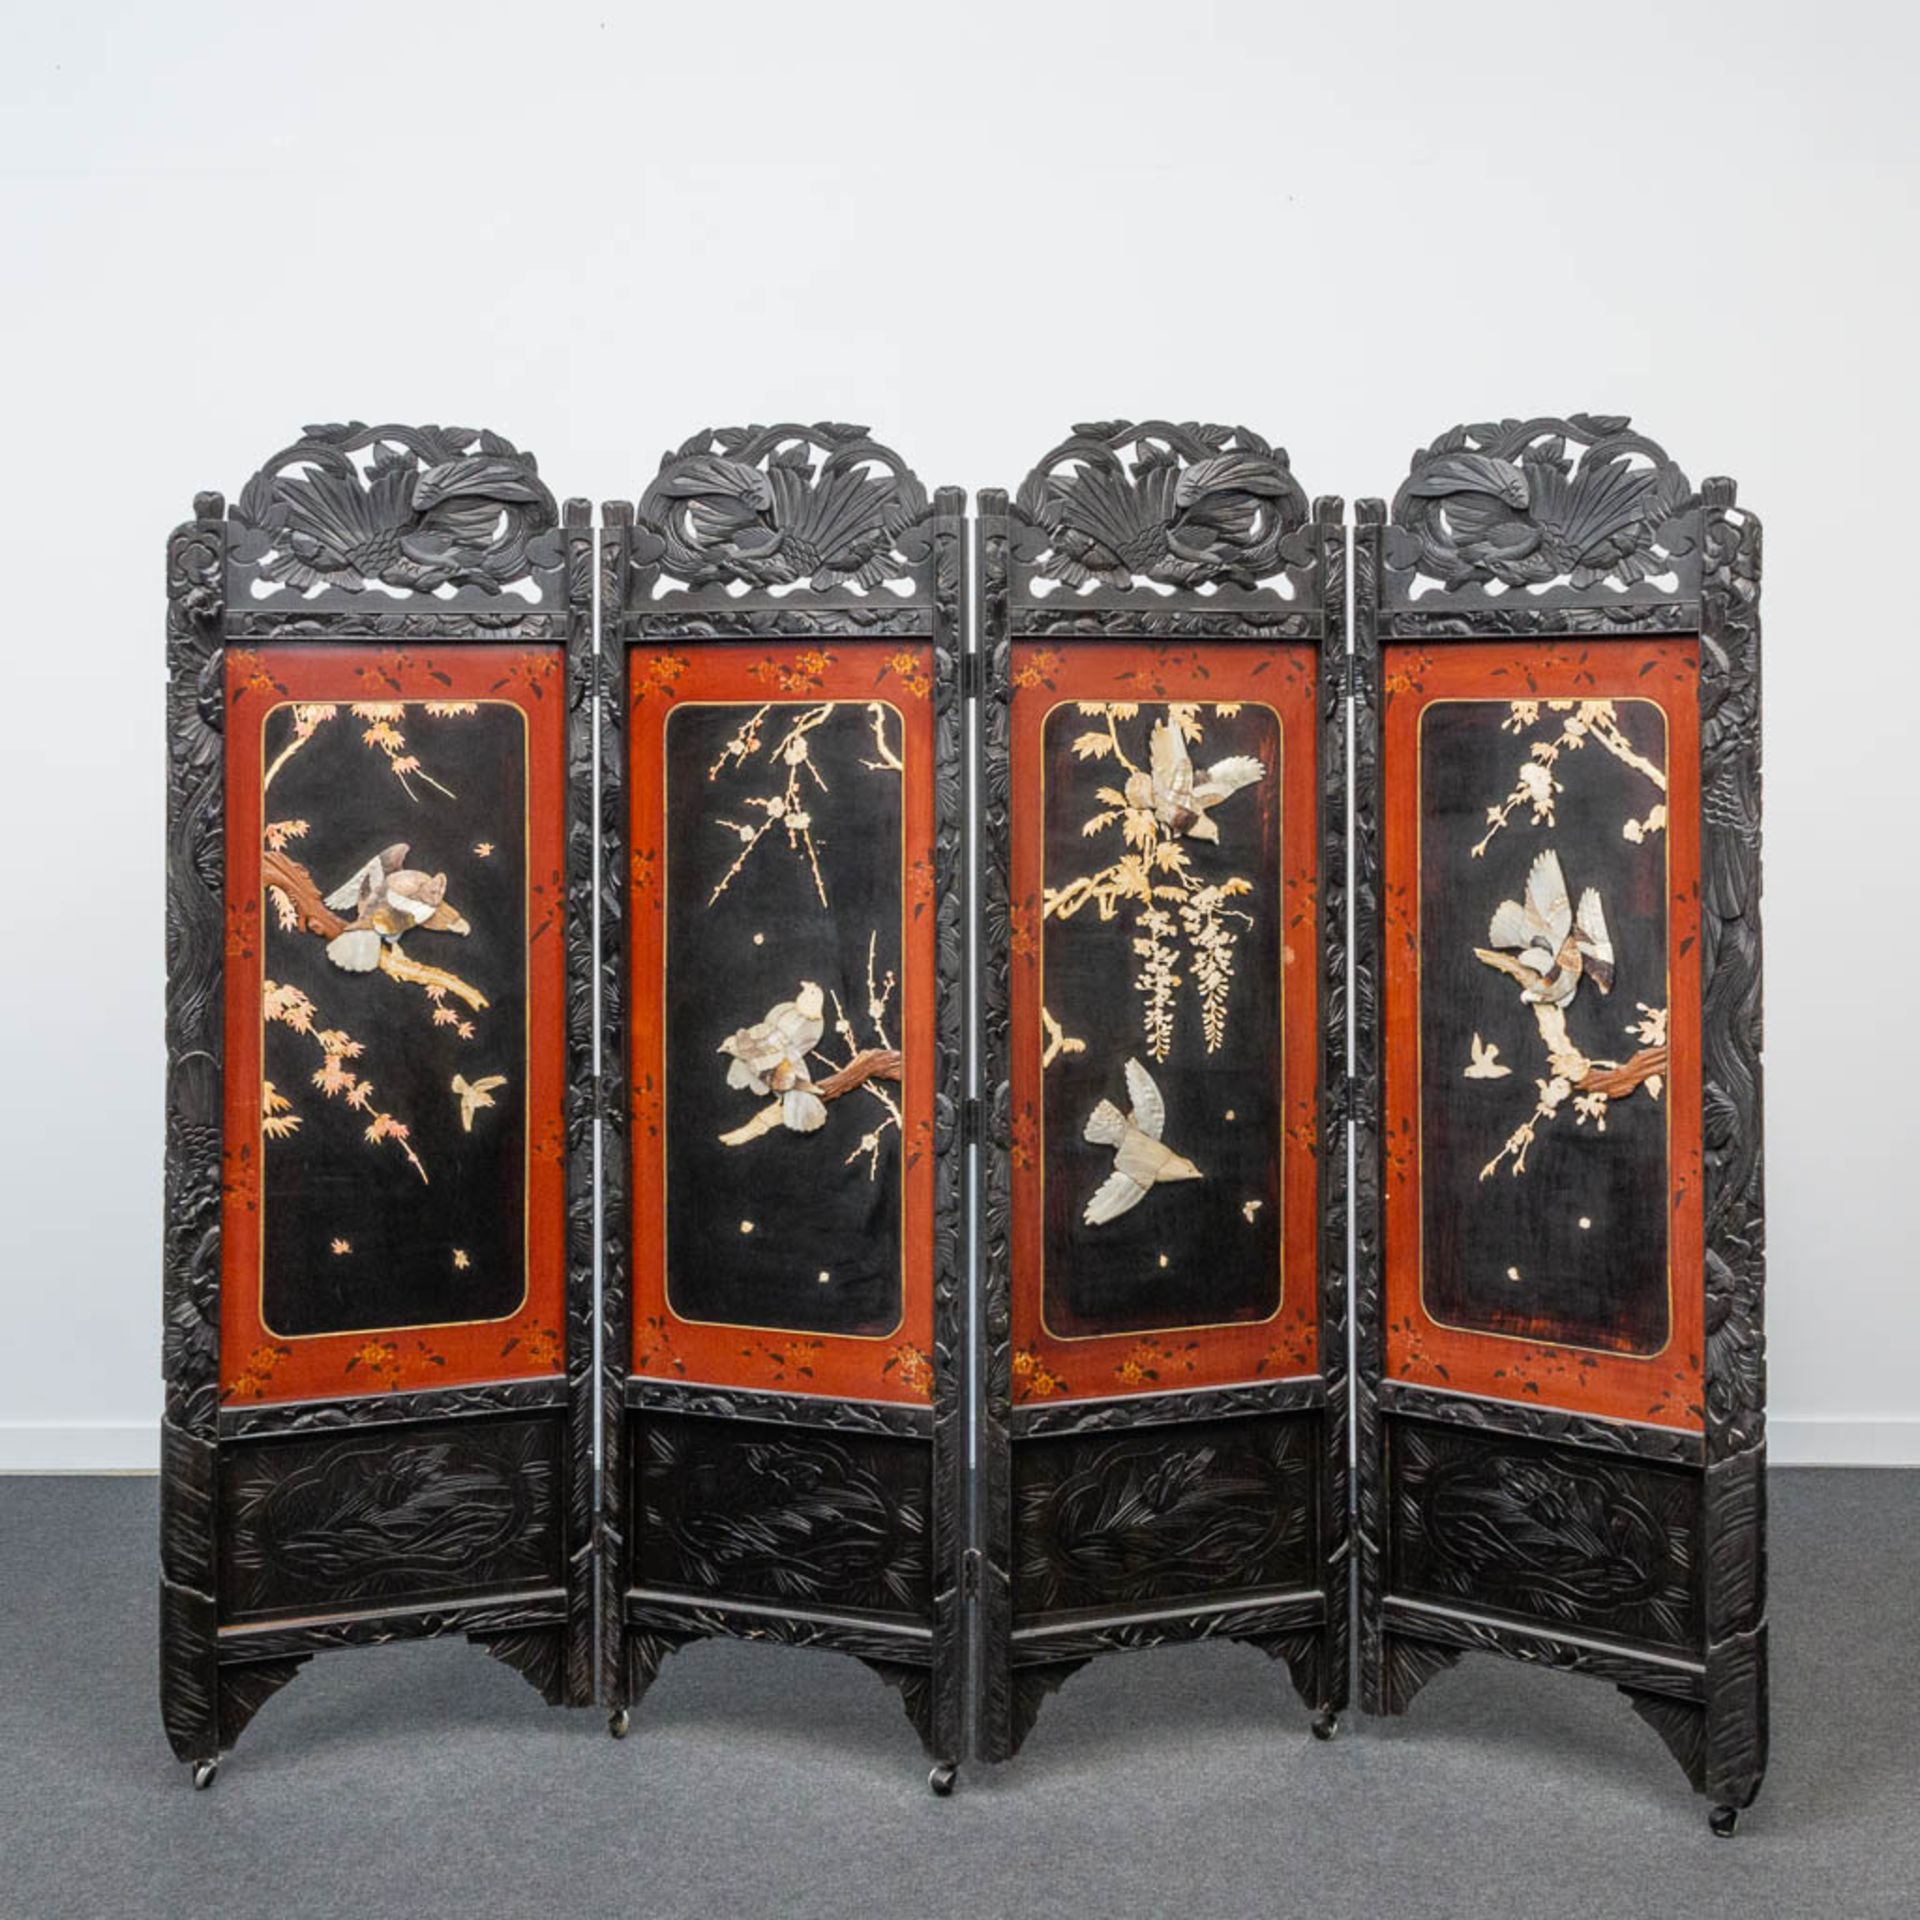 A Chinese hardwood folding screen / Room divider with stone birds decorations - Image 9 of 19